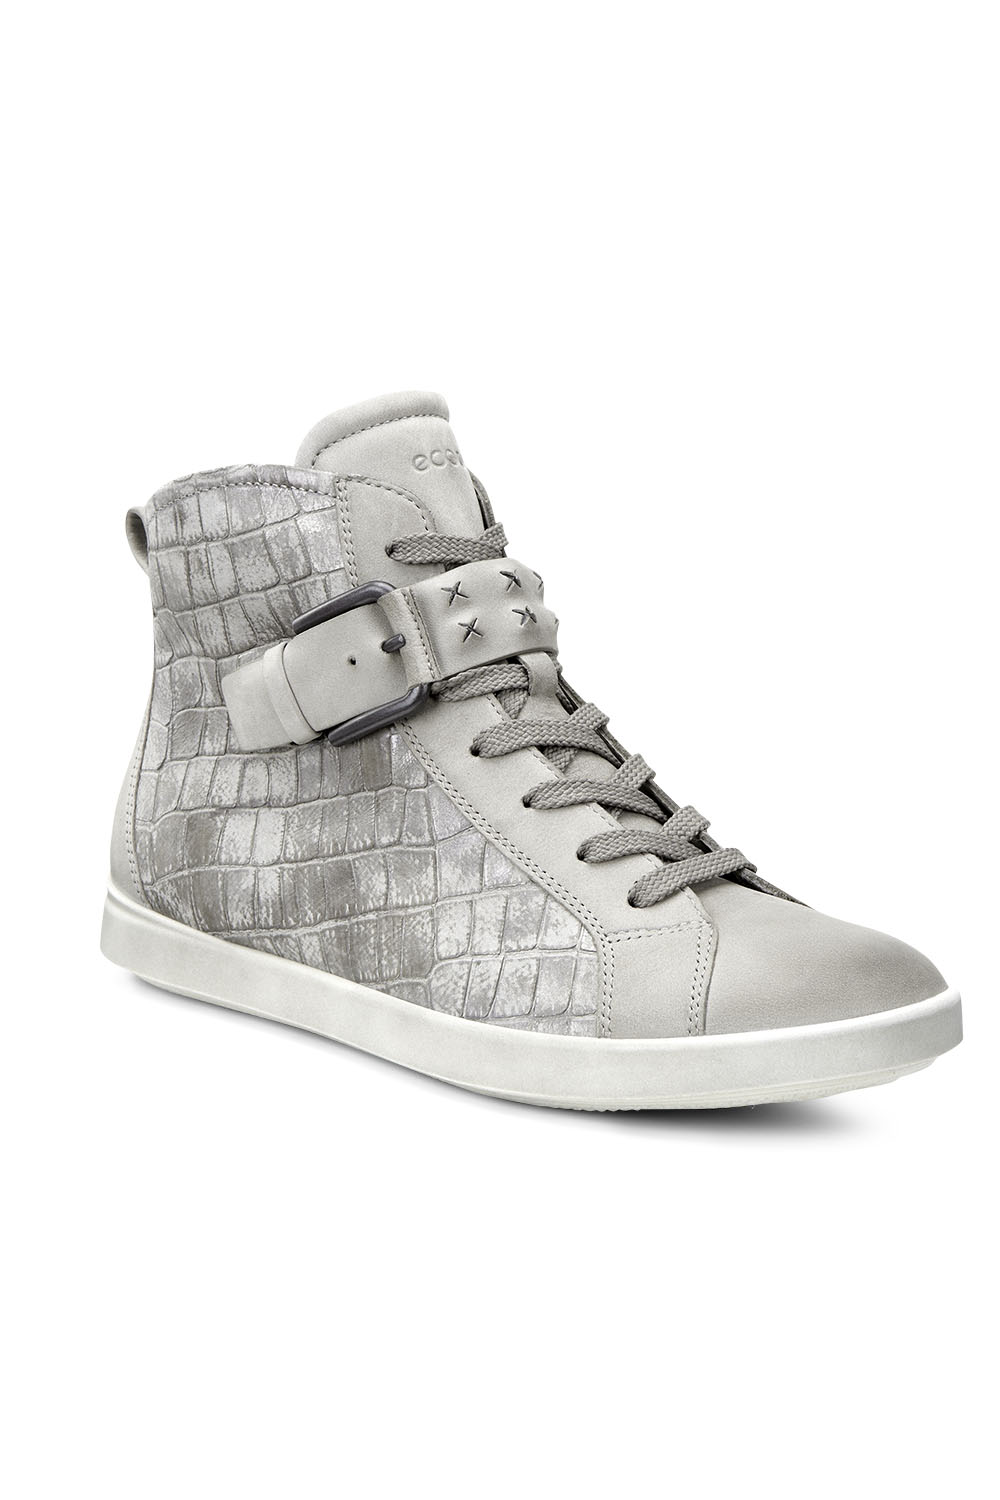 Sneakers, $319, by Ecco.